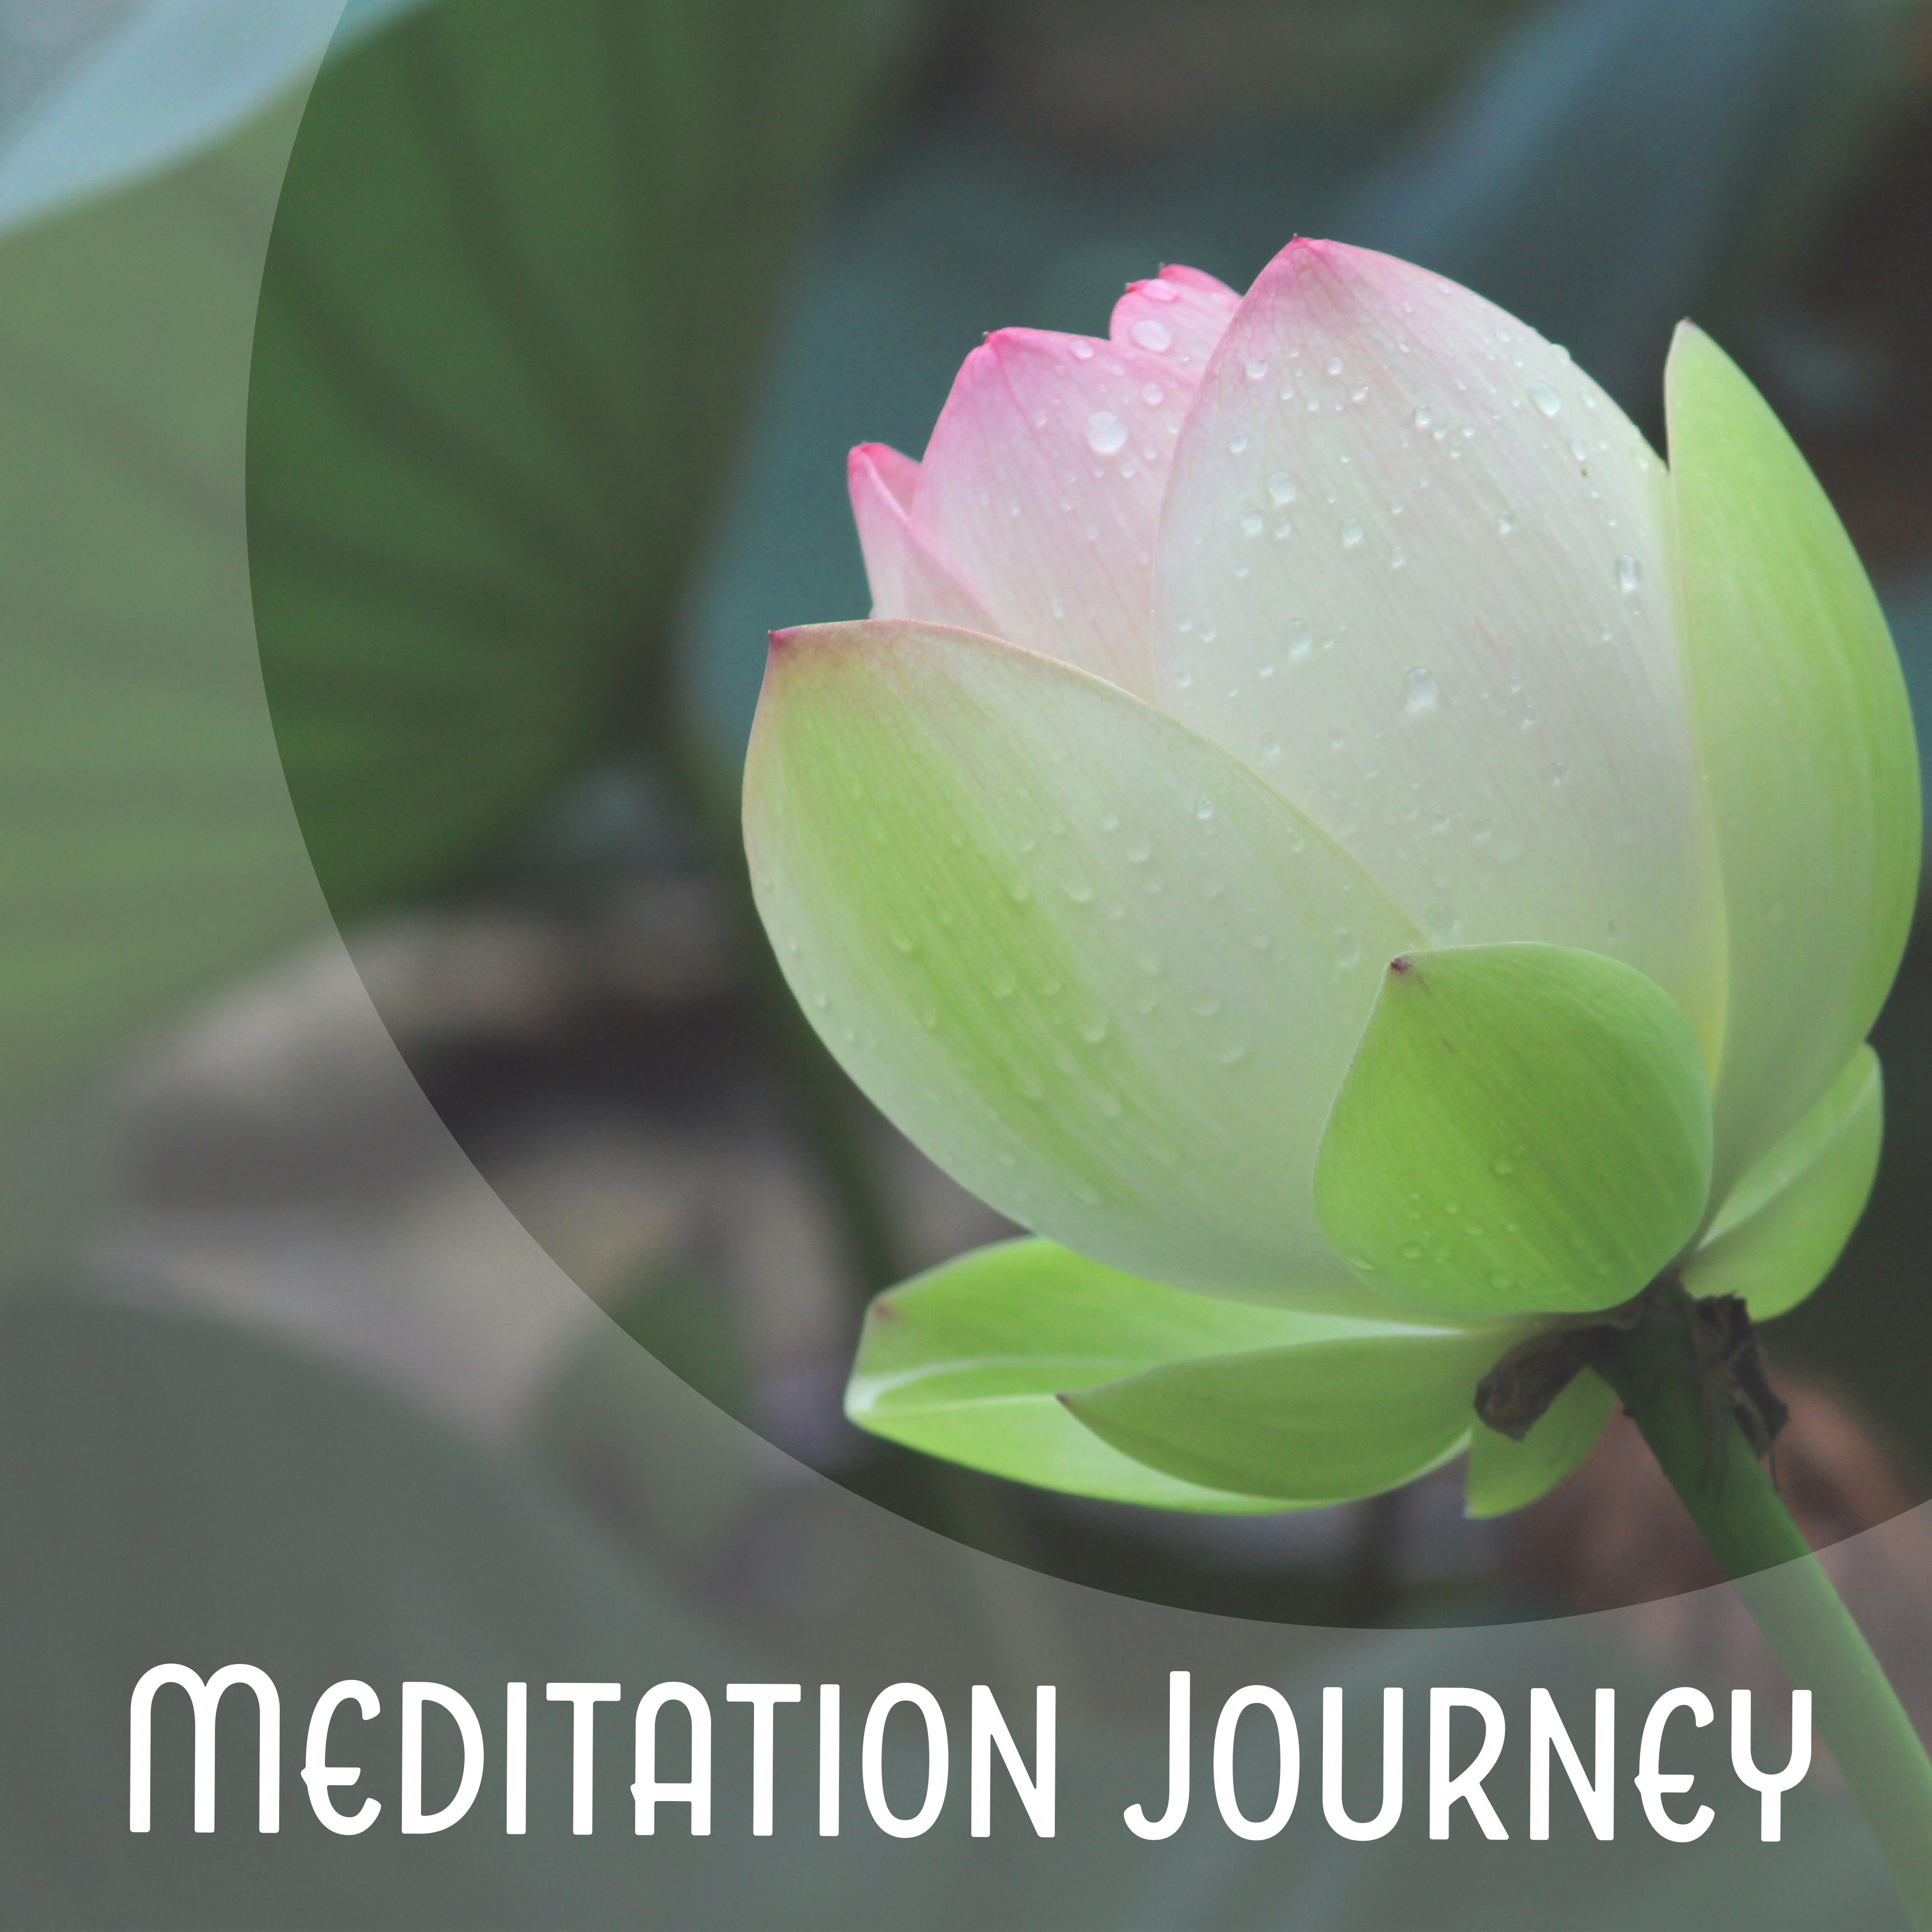 Meditation Journey  New Age Music, Deep Sounds of Nature, Helpful for Meditation at Home